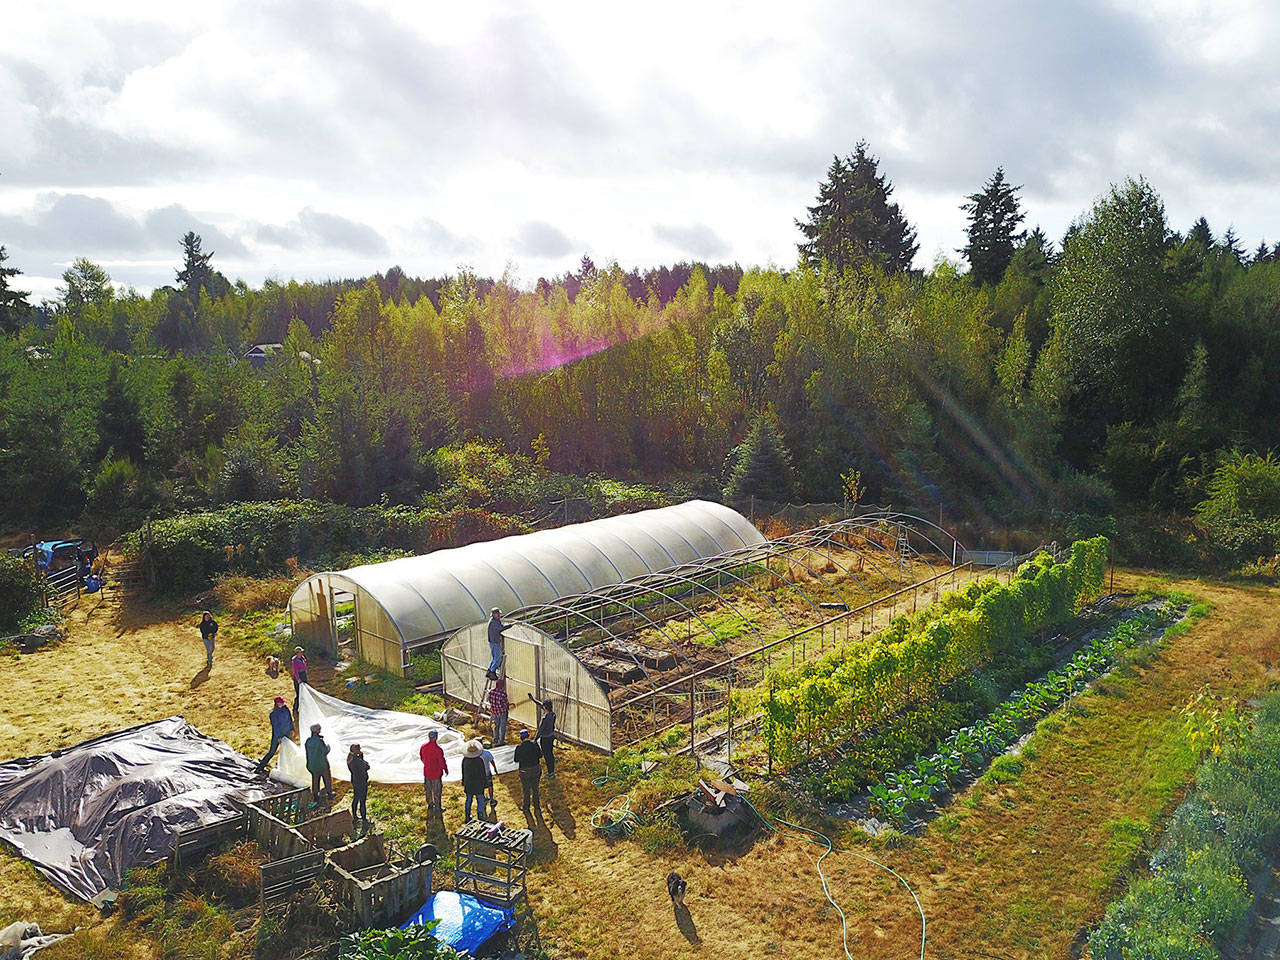 Islanders work on a hoop house at Shoulder to Shoulder Farm, a collective located behind Vashon Cohousing where those from all walks of life grow food for their families. The farm this month concluded its 11th season. (Woody Peterson Photo)